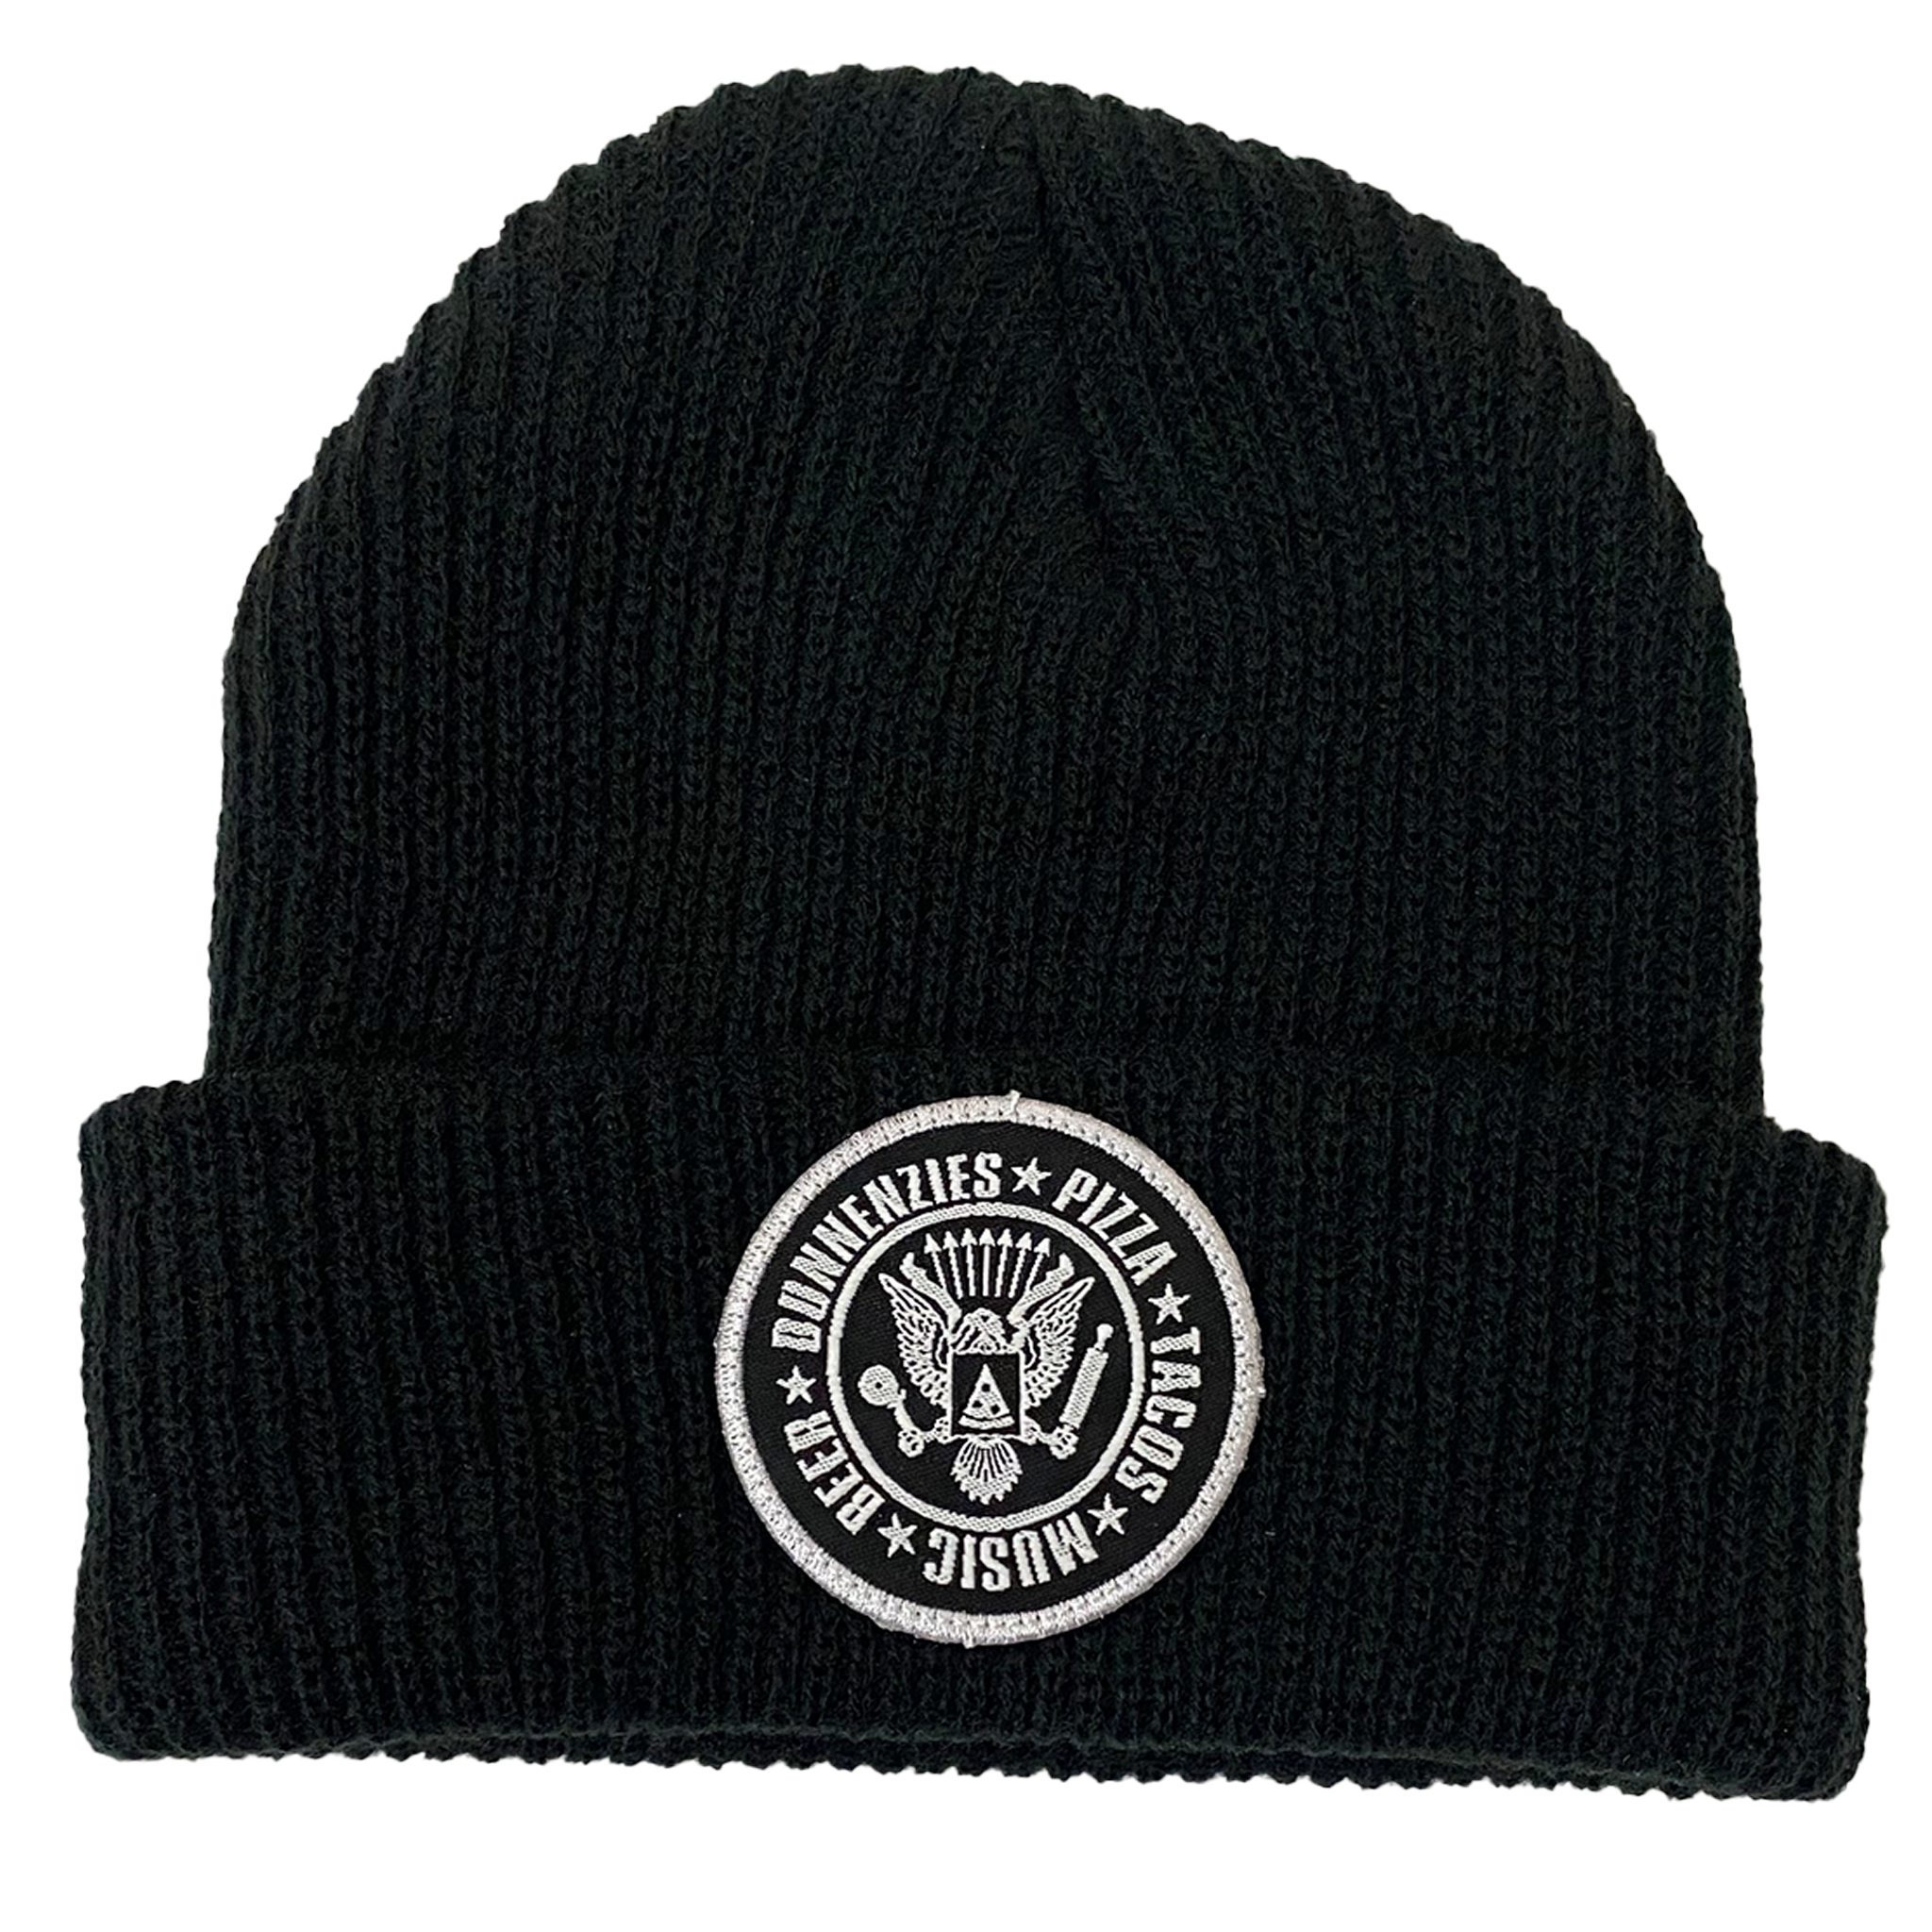 Dunnenzies Beanie - Adult Unisex One Size Fits Most - Black